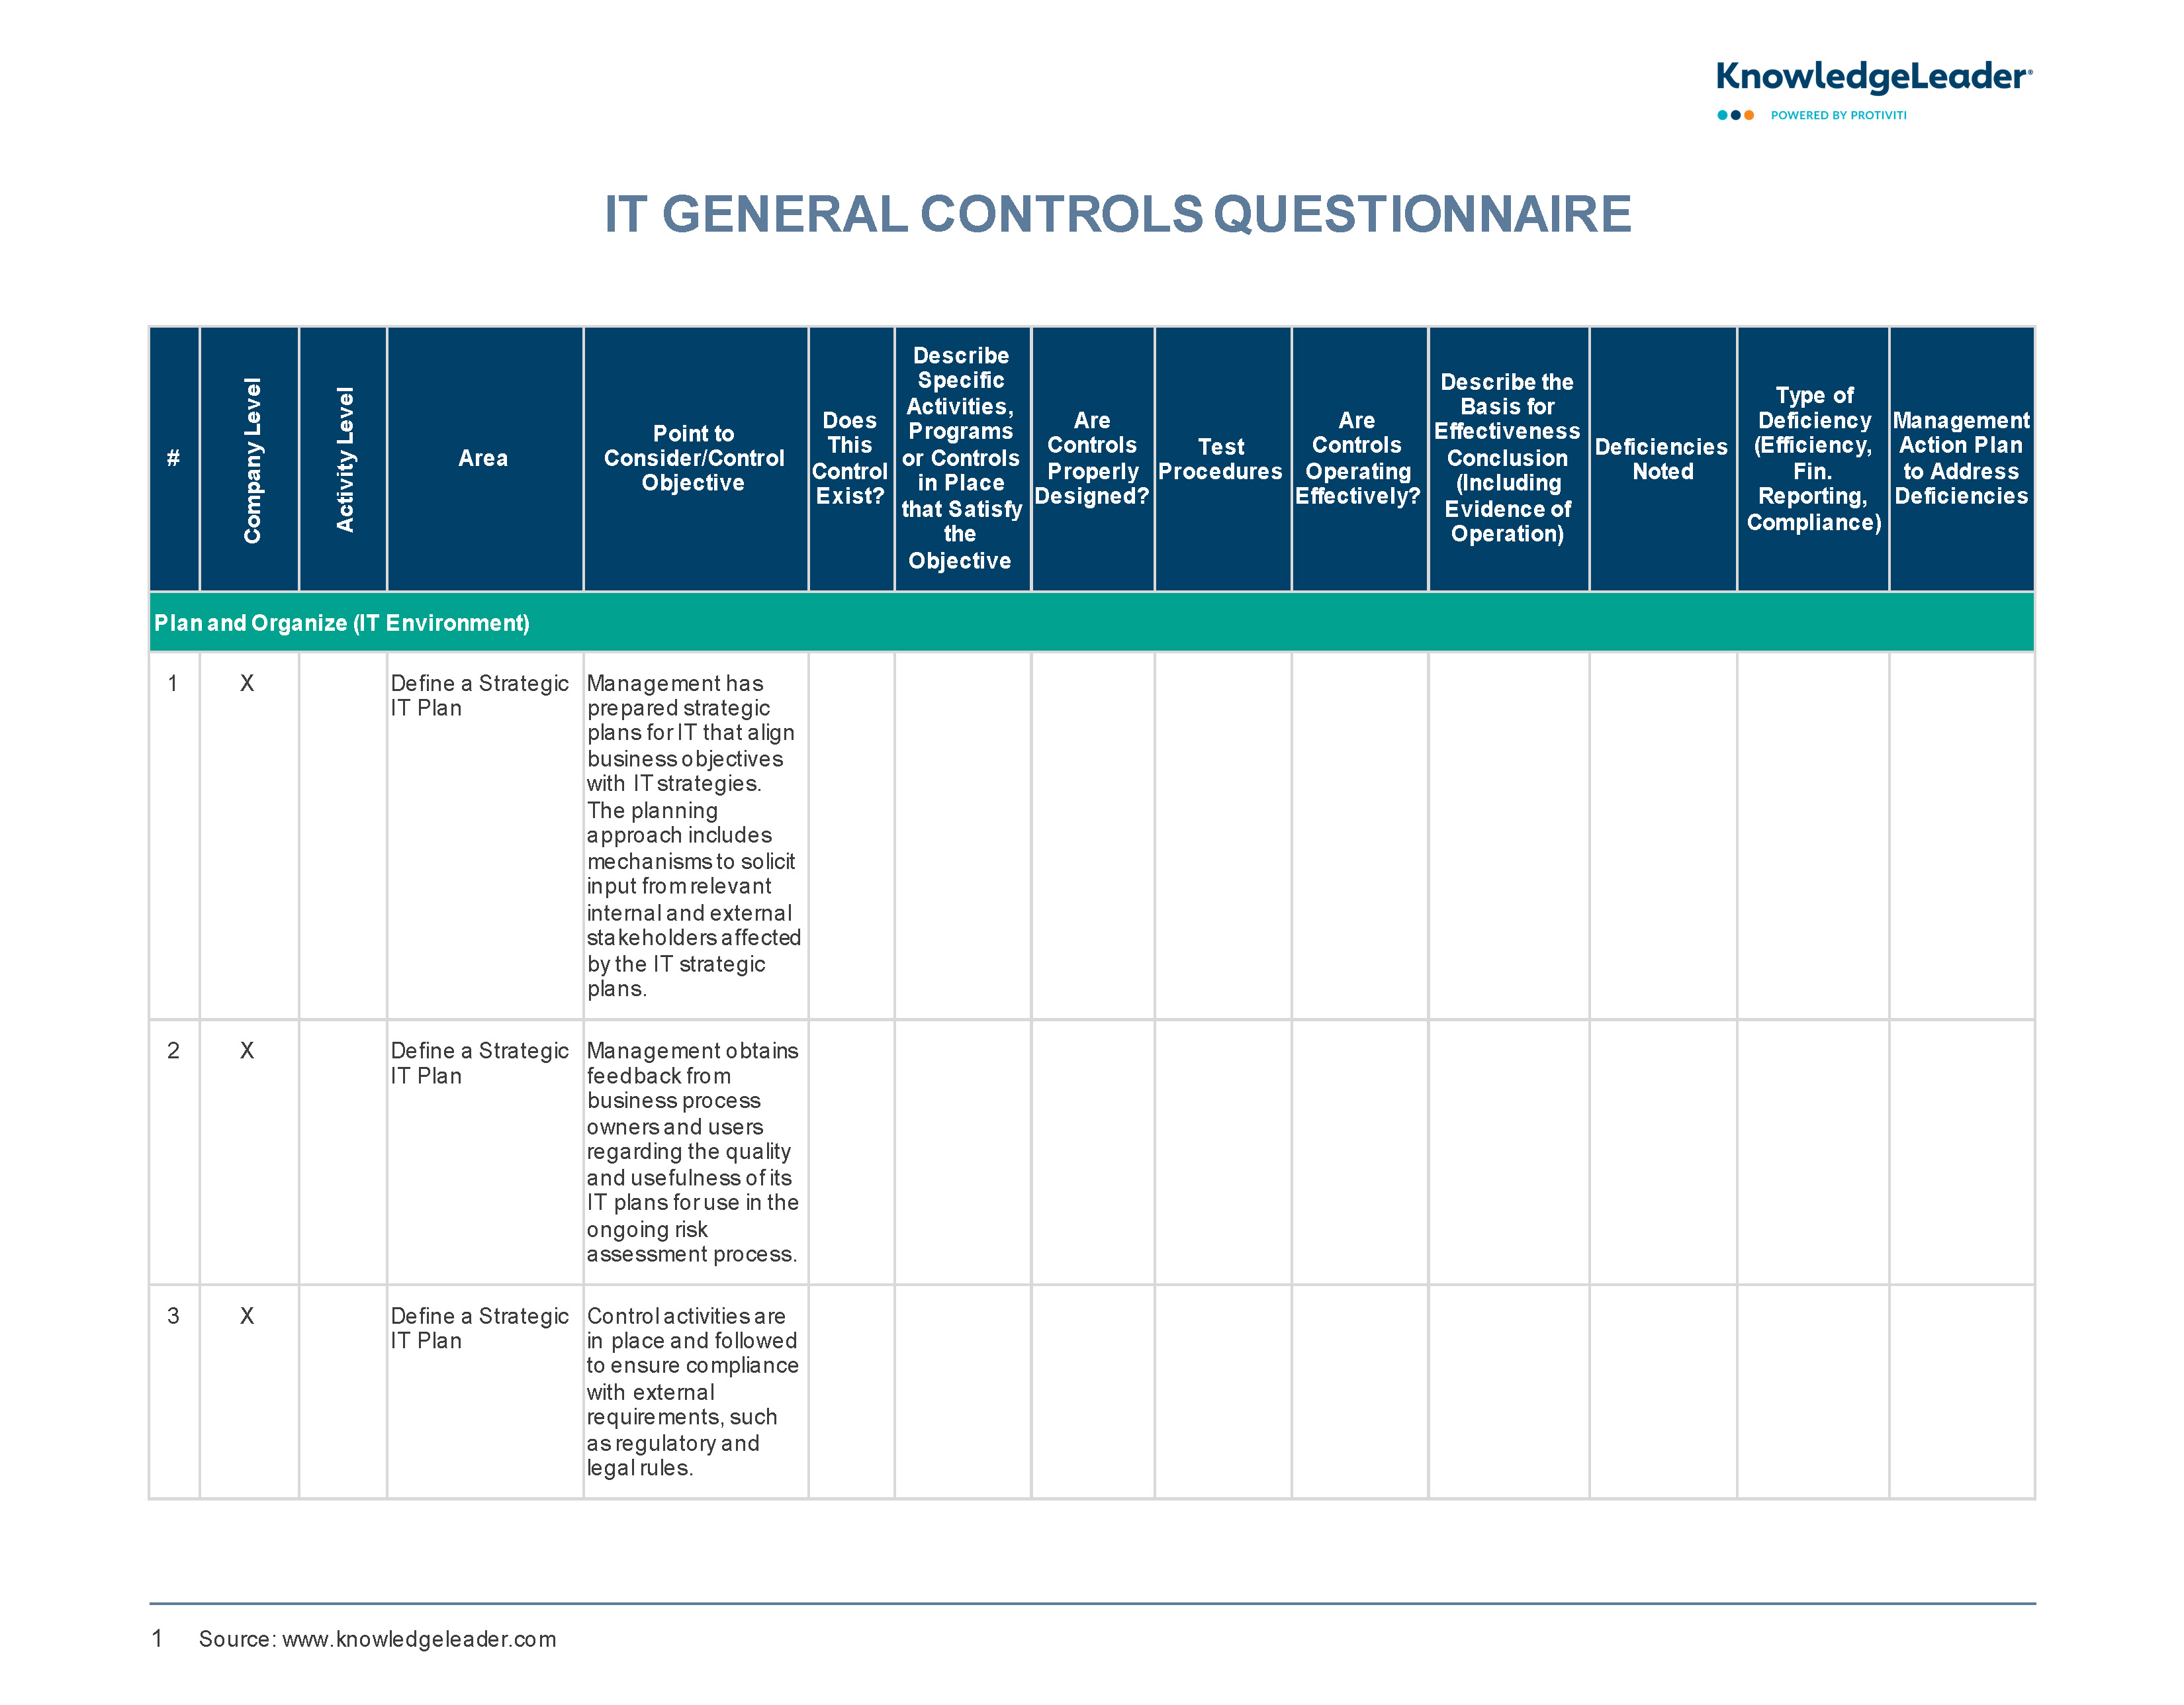 Screenshot of the first page of IT General Controls Questionnaire